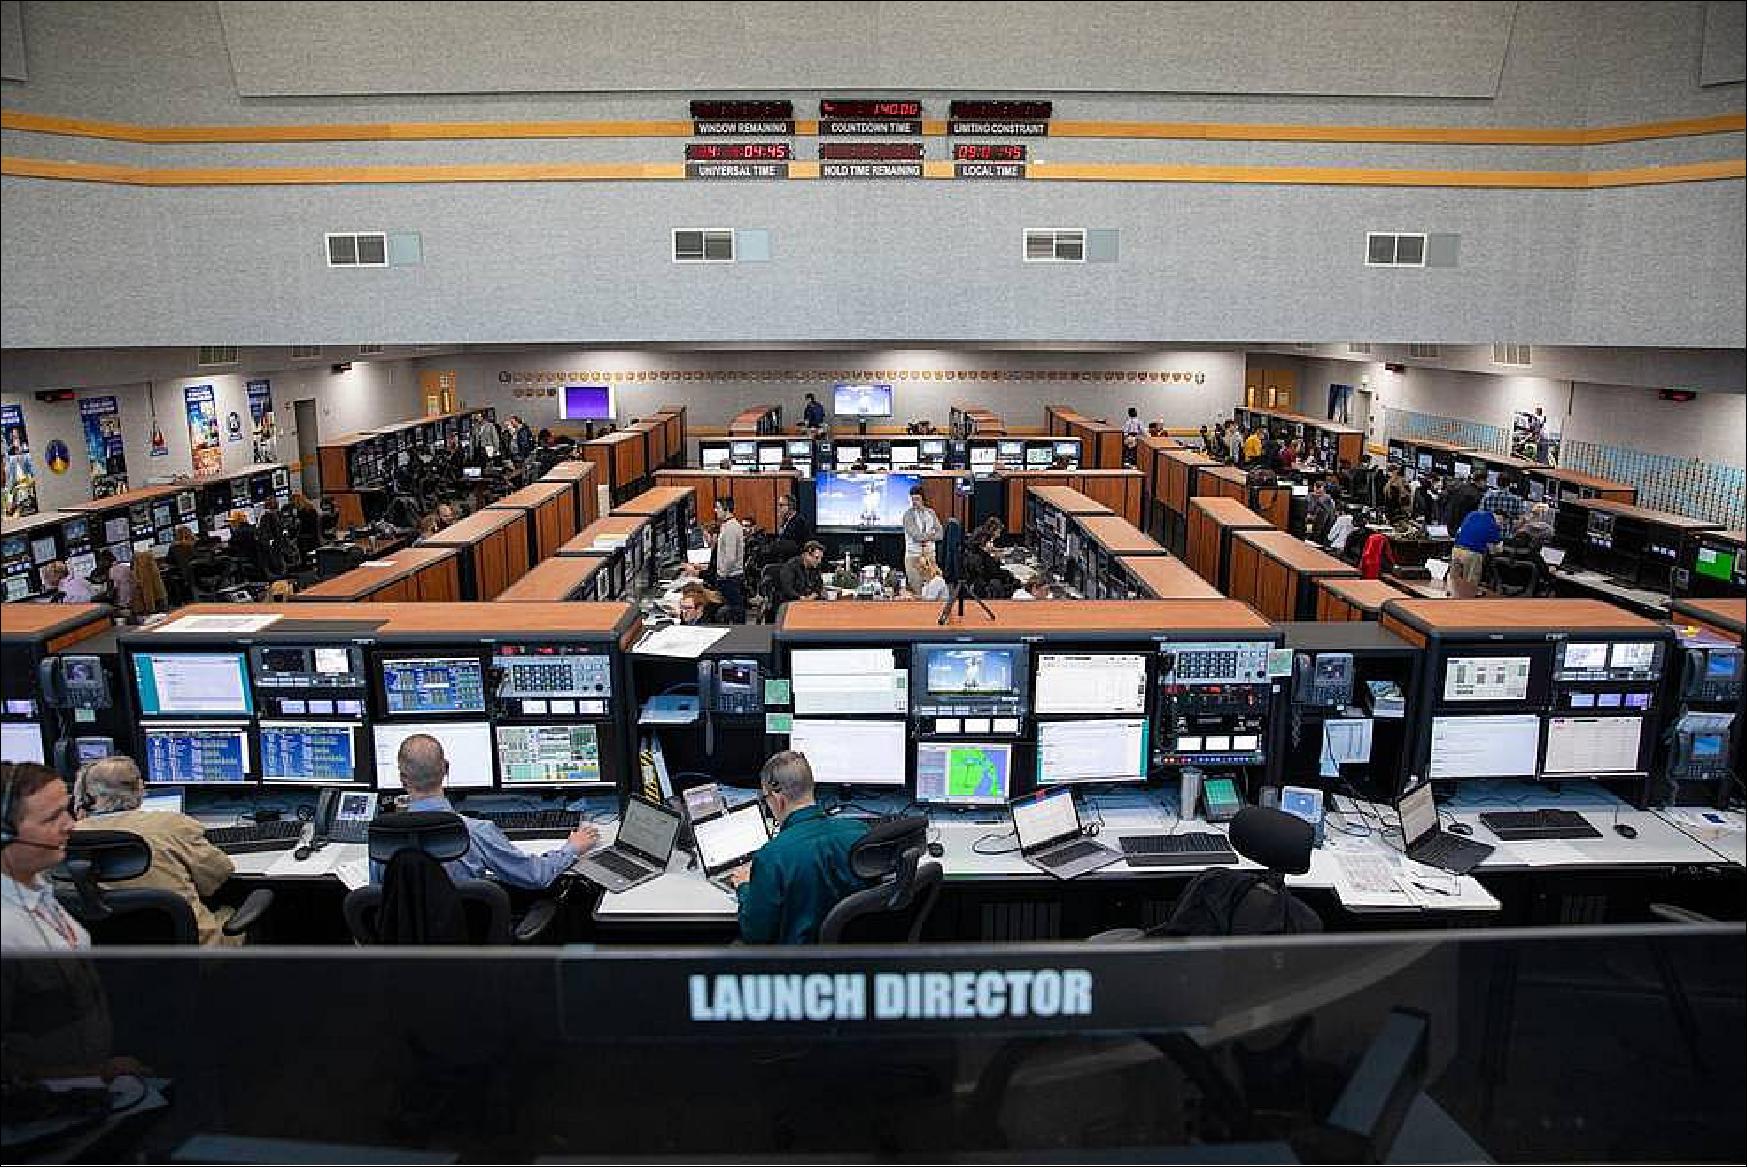 Figure 32: Members of the Artemis I launch team participate in a countdown simulation inside the Launch Control Center’s Firing Room 1 at NASA’s Kennedy Space Center in Florida on Feb. 3, 2020. A team of nearly 100 engineers from Orion, Space Launch System and Exploration Ground Systems came together to work through a series of simulated challenges, as well as a final countdown procedure. Artemis I will be the first integrated test flight of the Orion spacecraft and SLS rocket – the system that will ultimately land the first woman and the next man on the Moon (image credit: NASA, Kim Shiflett)